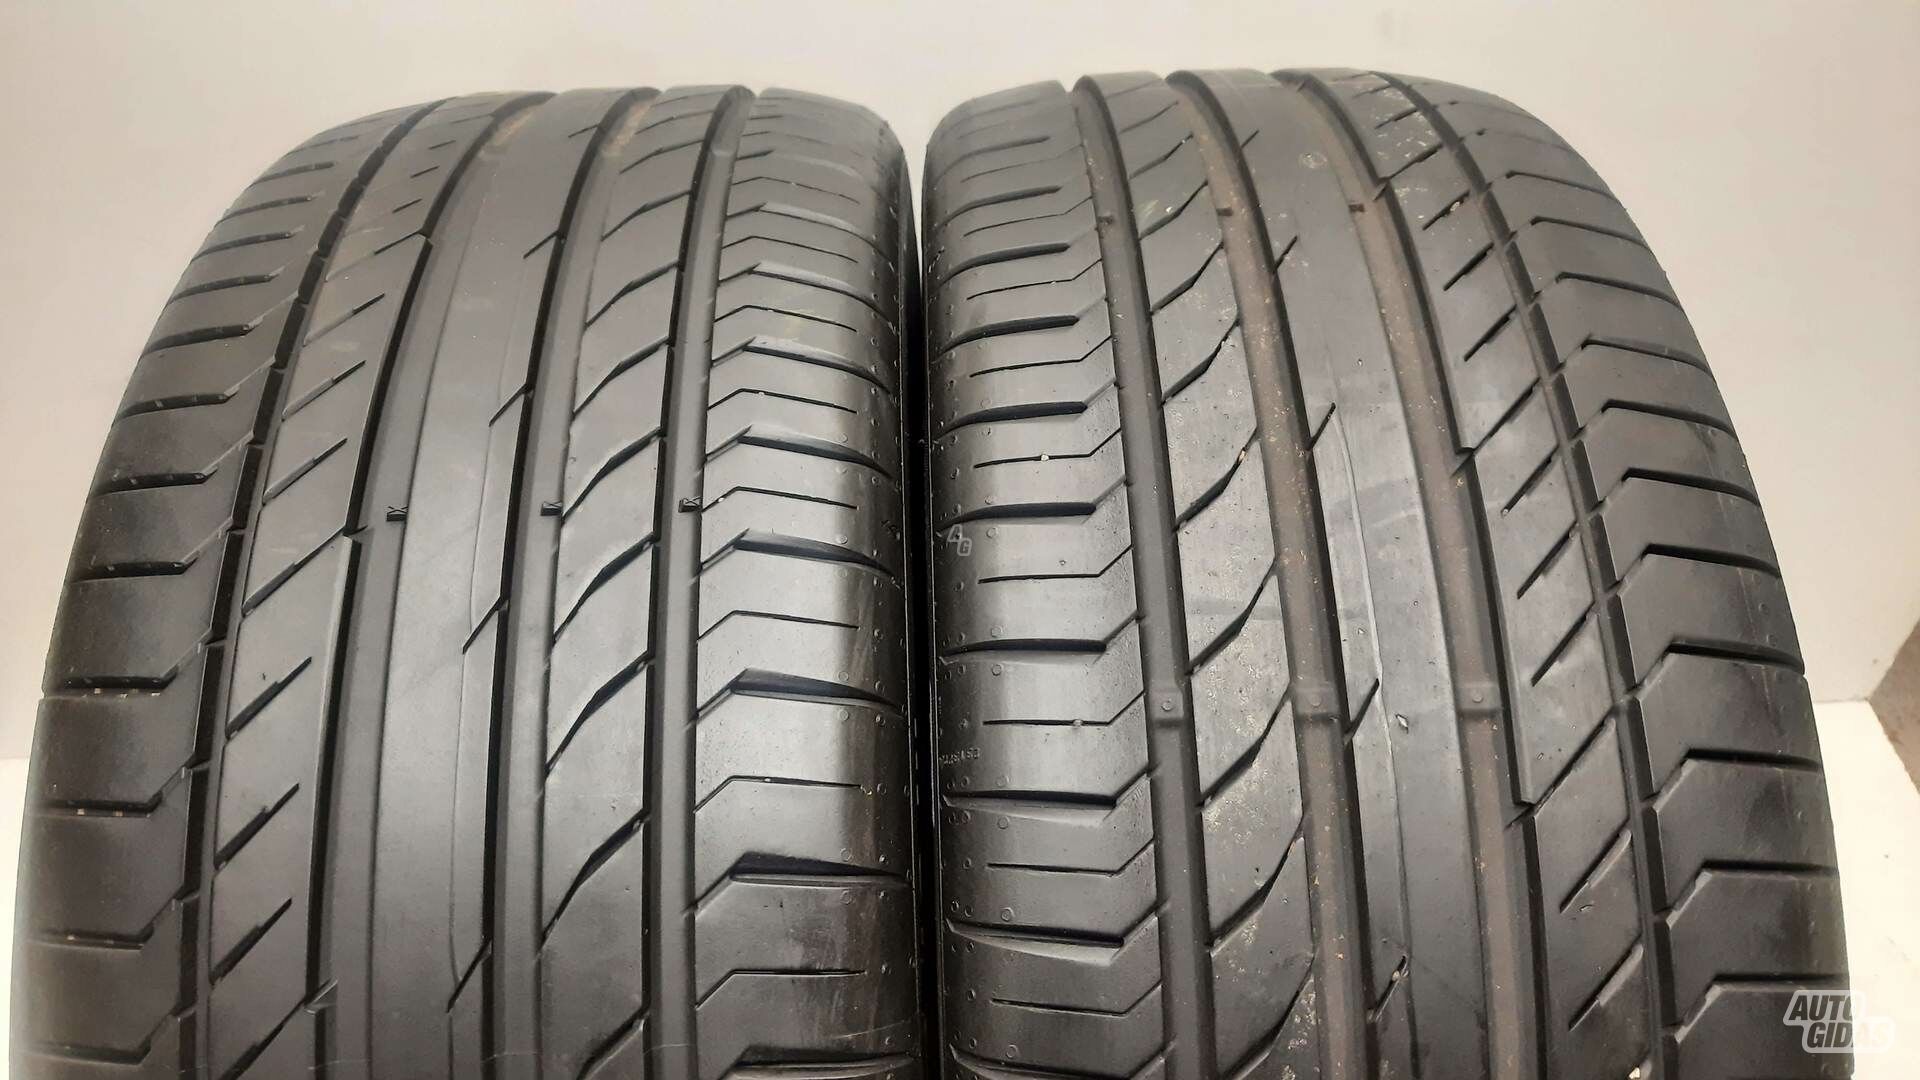 Continental ContiSportContact 5P R19 summer tyres passanger car